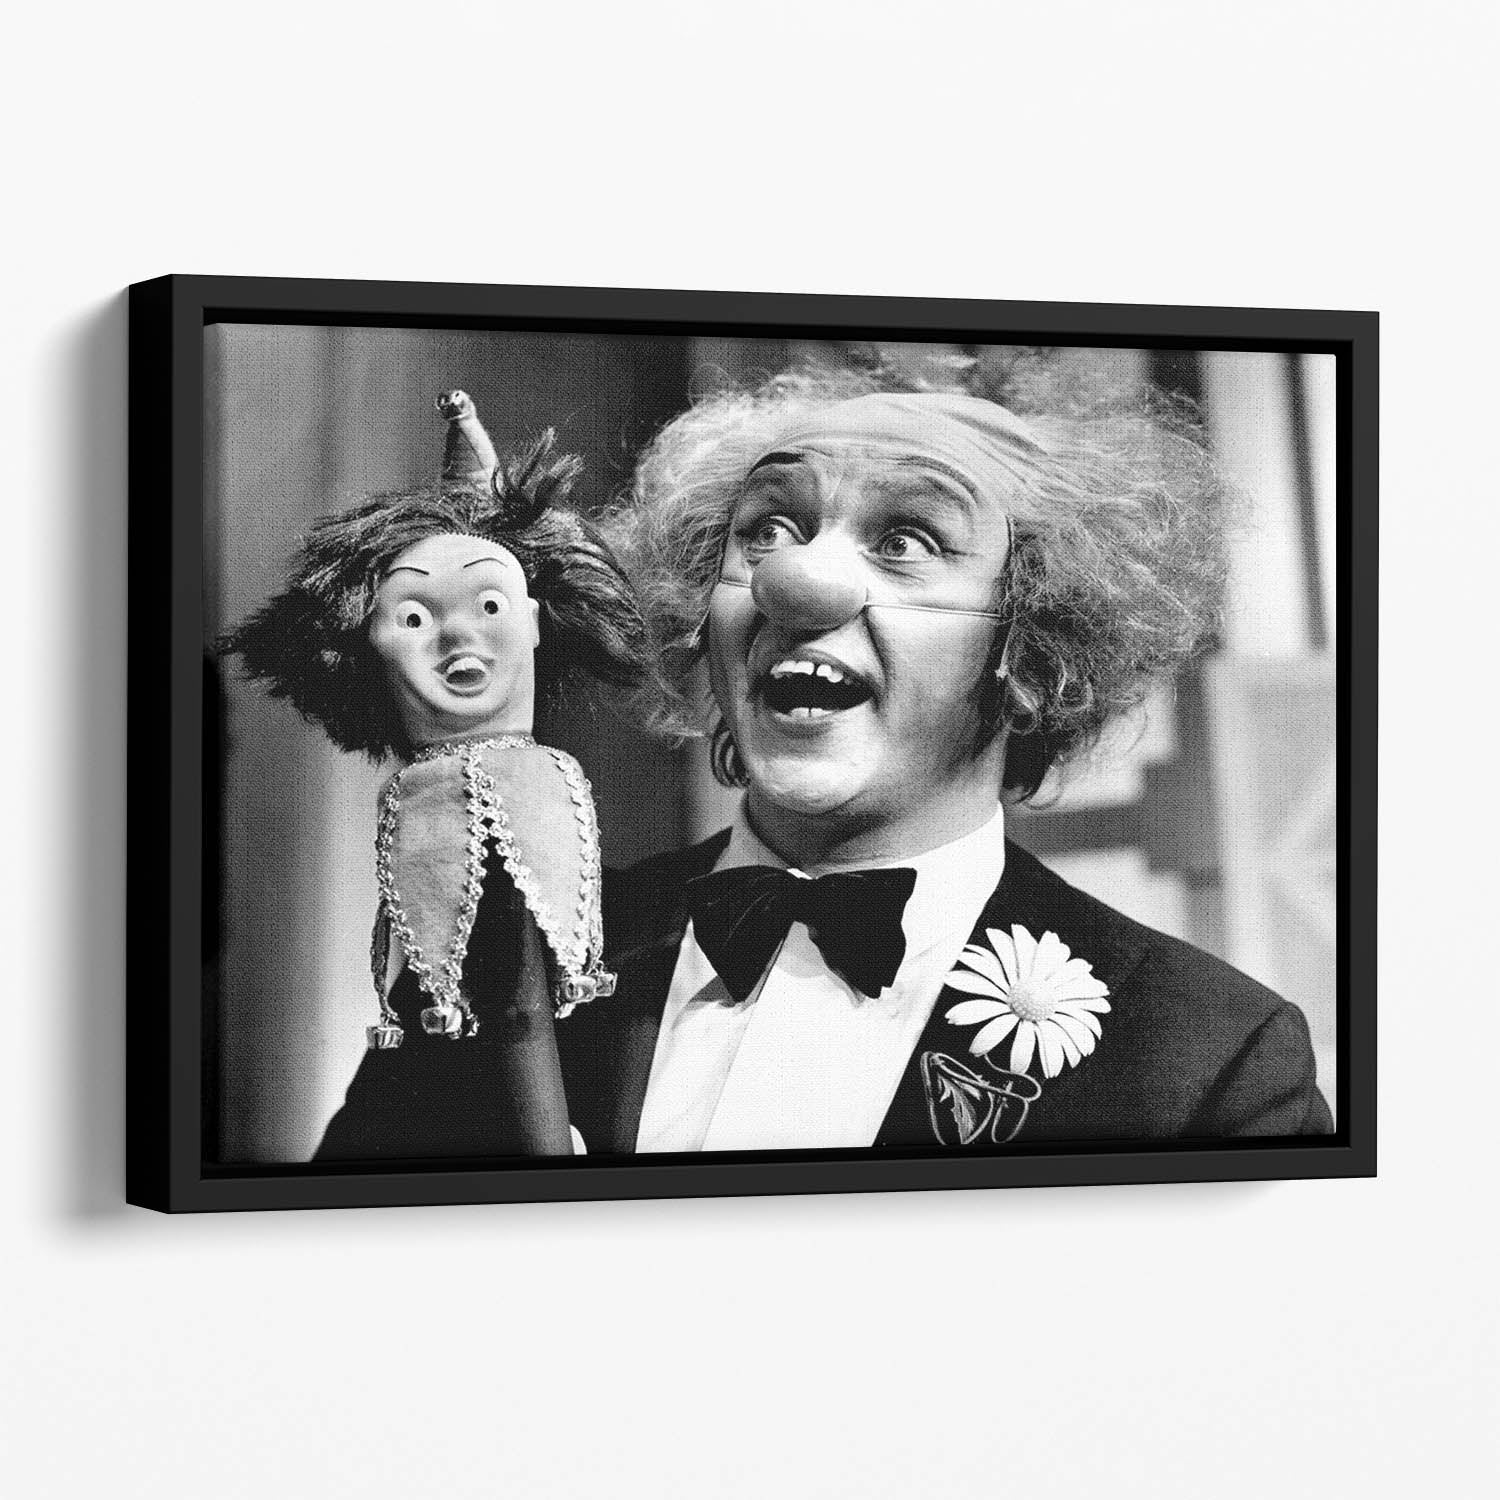 Ken Dodd at the Liverpool Playhouse Floating Framed Canvas